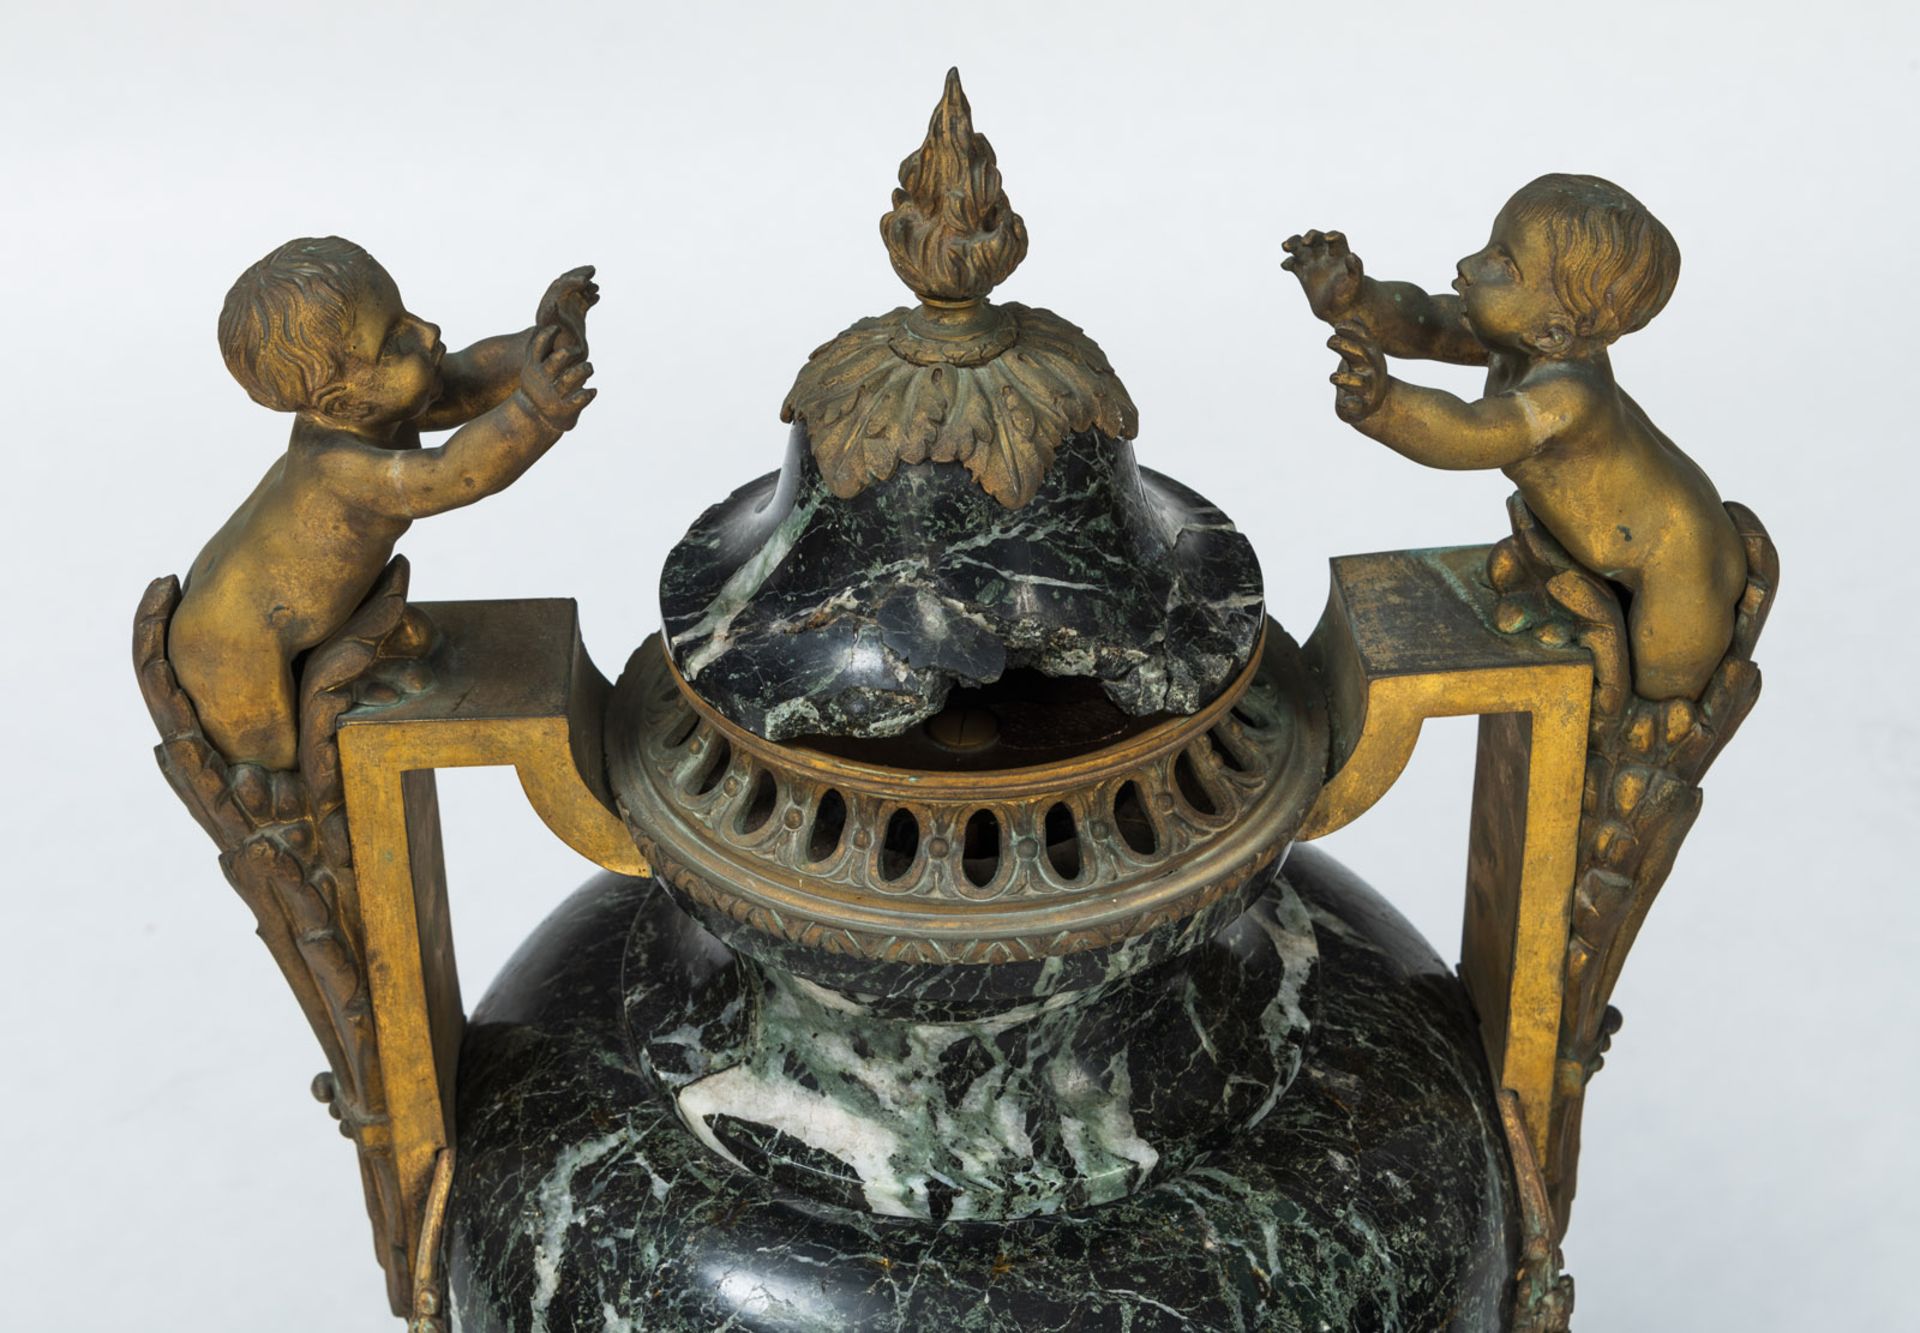 A PAIR OF FRENCH ORMOLU MOUNTED VERT DE MER MARBLE TWO-HANDLED VASES - Image 4 of 4